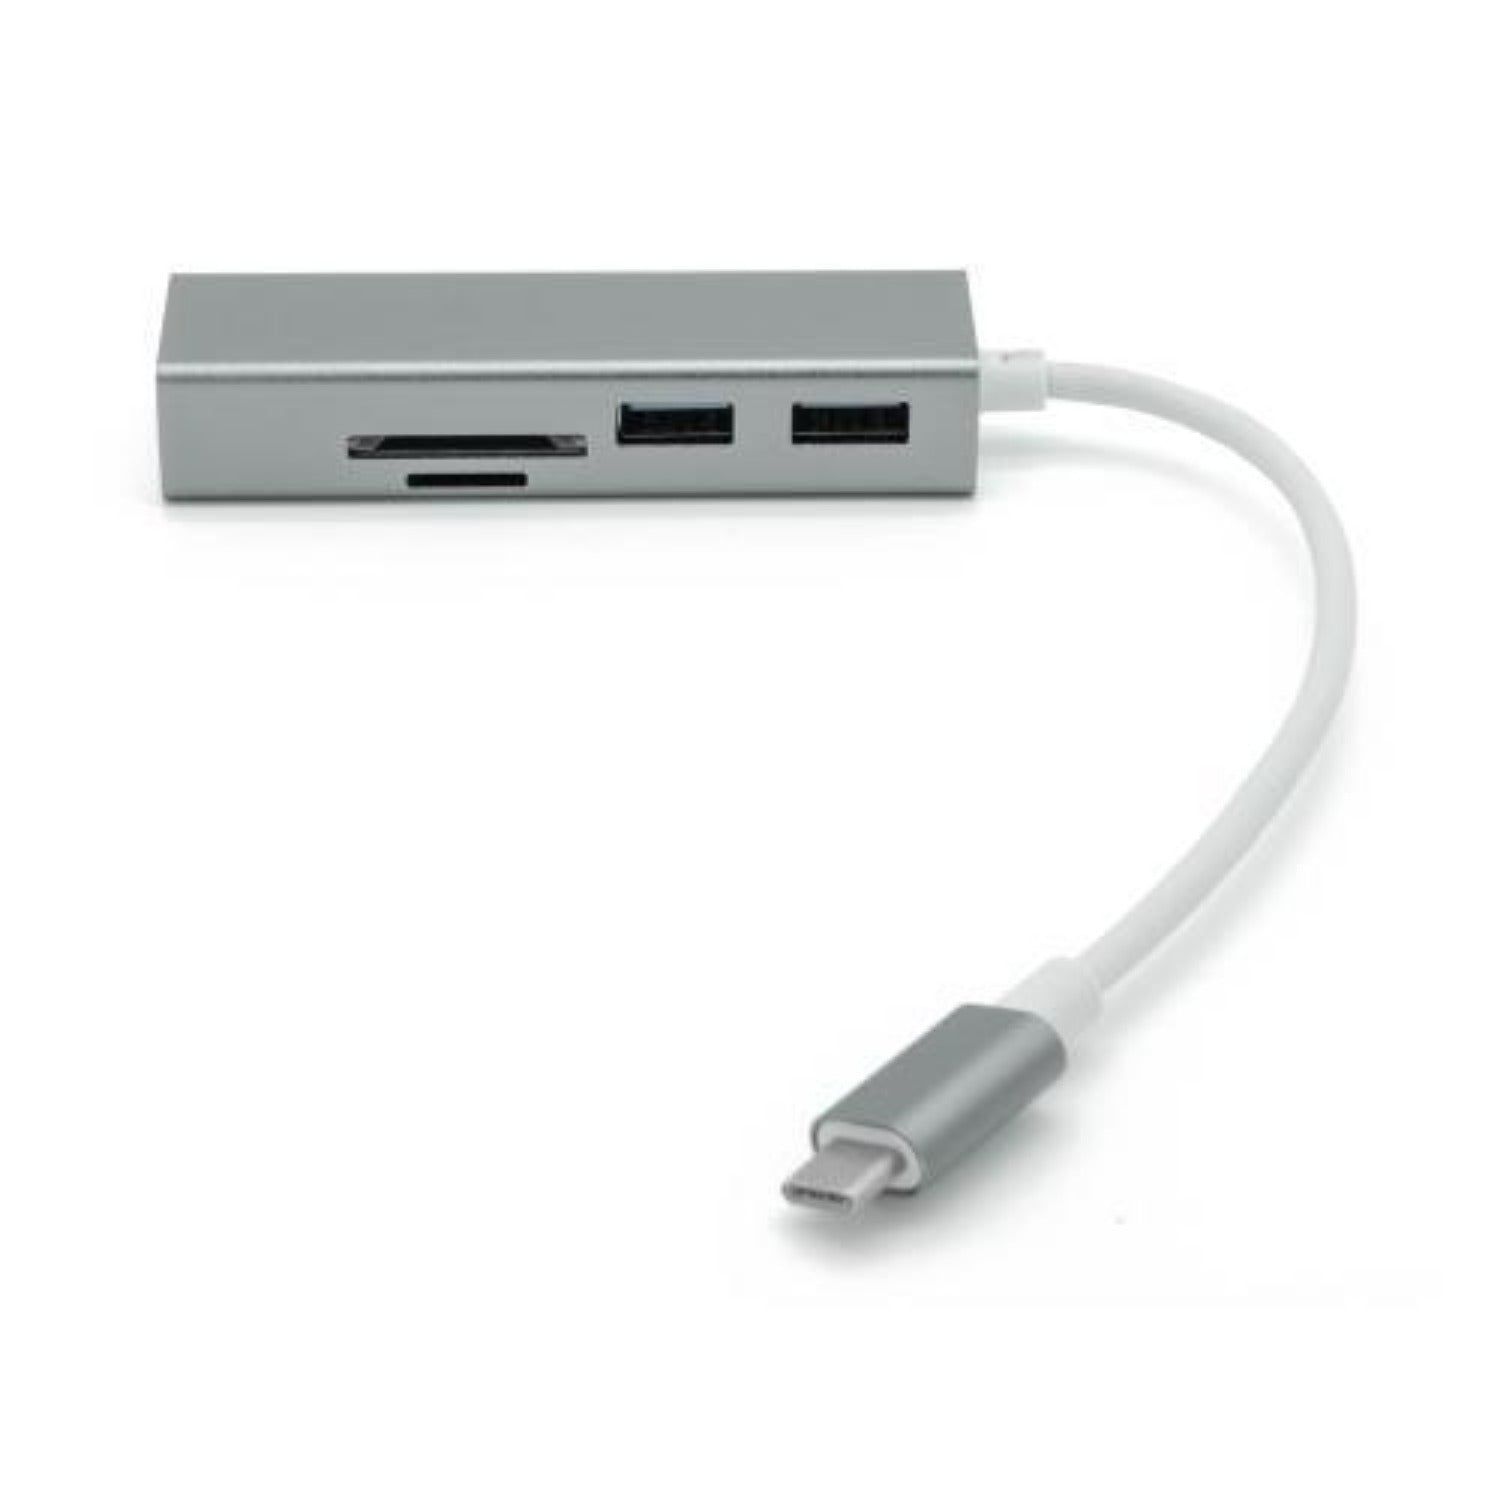 USB Type-C to USB3 hub and card reader adapter